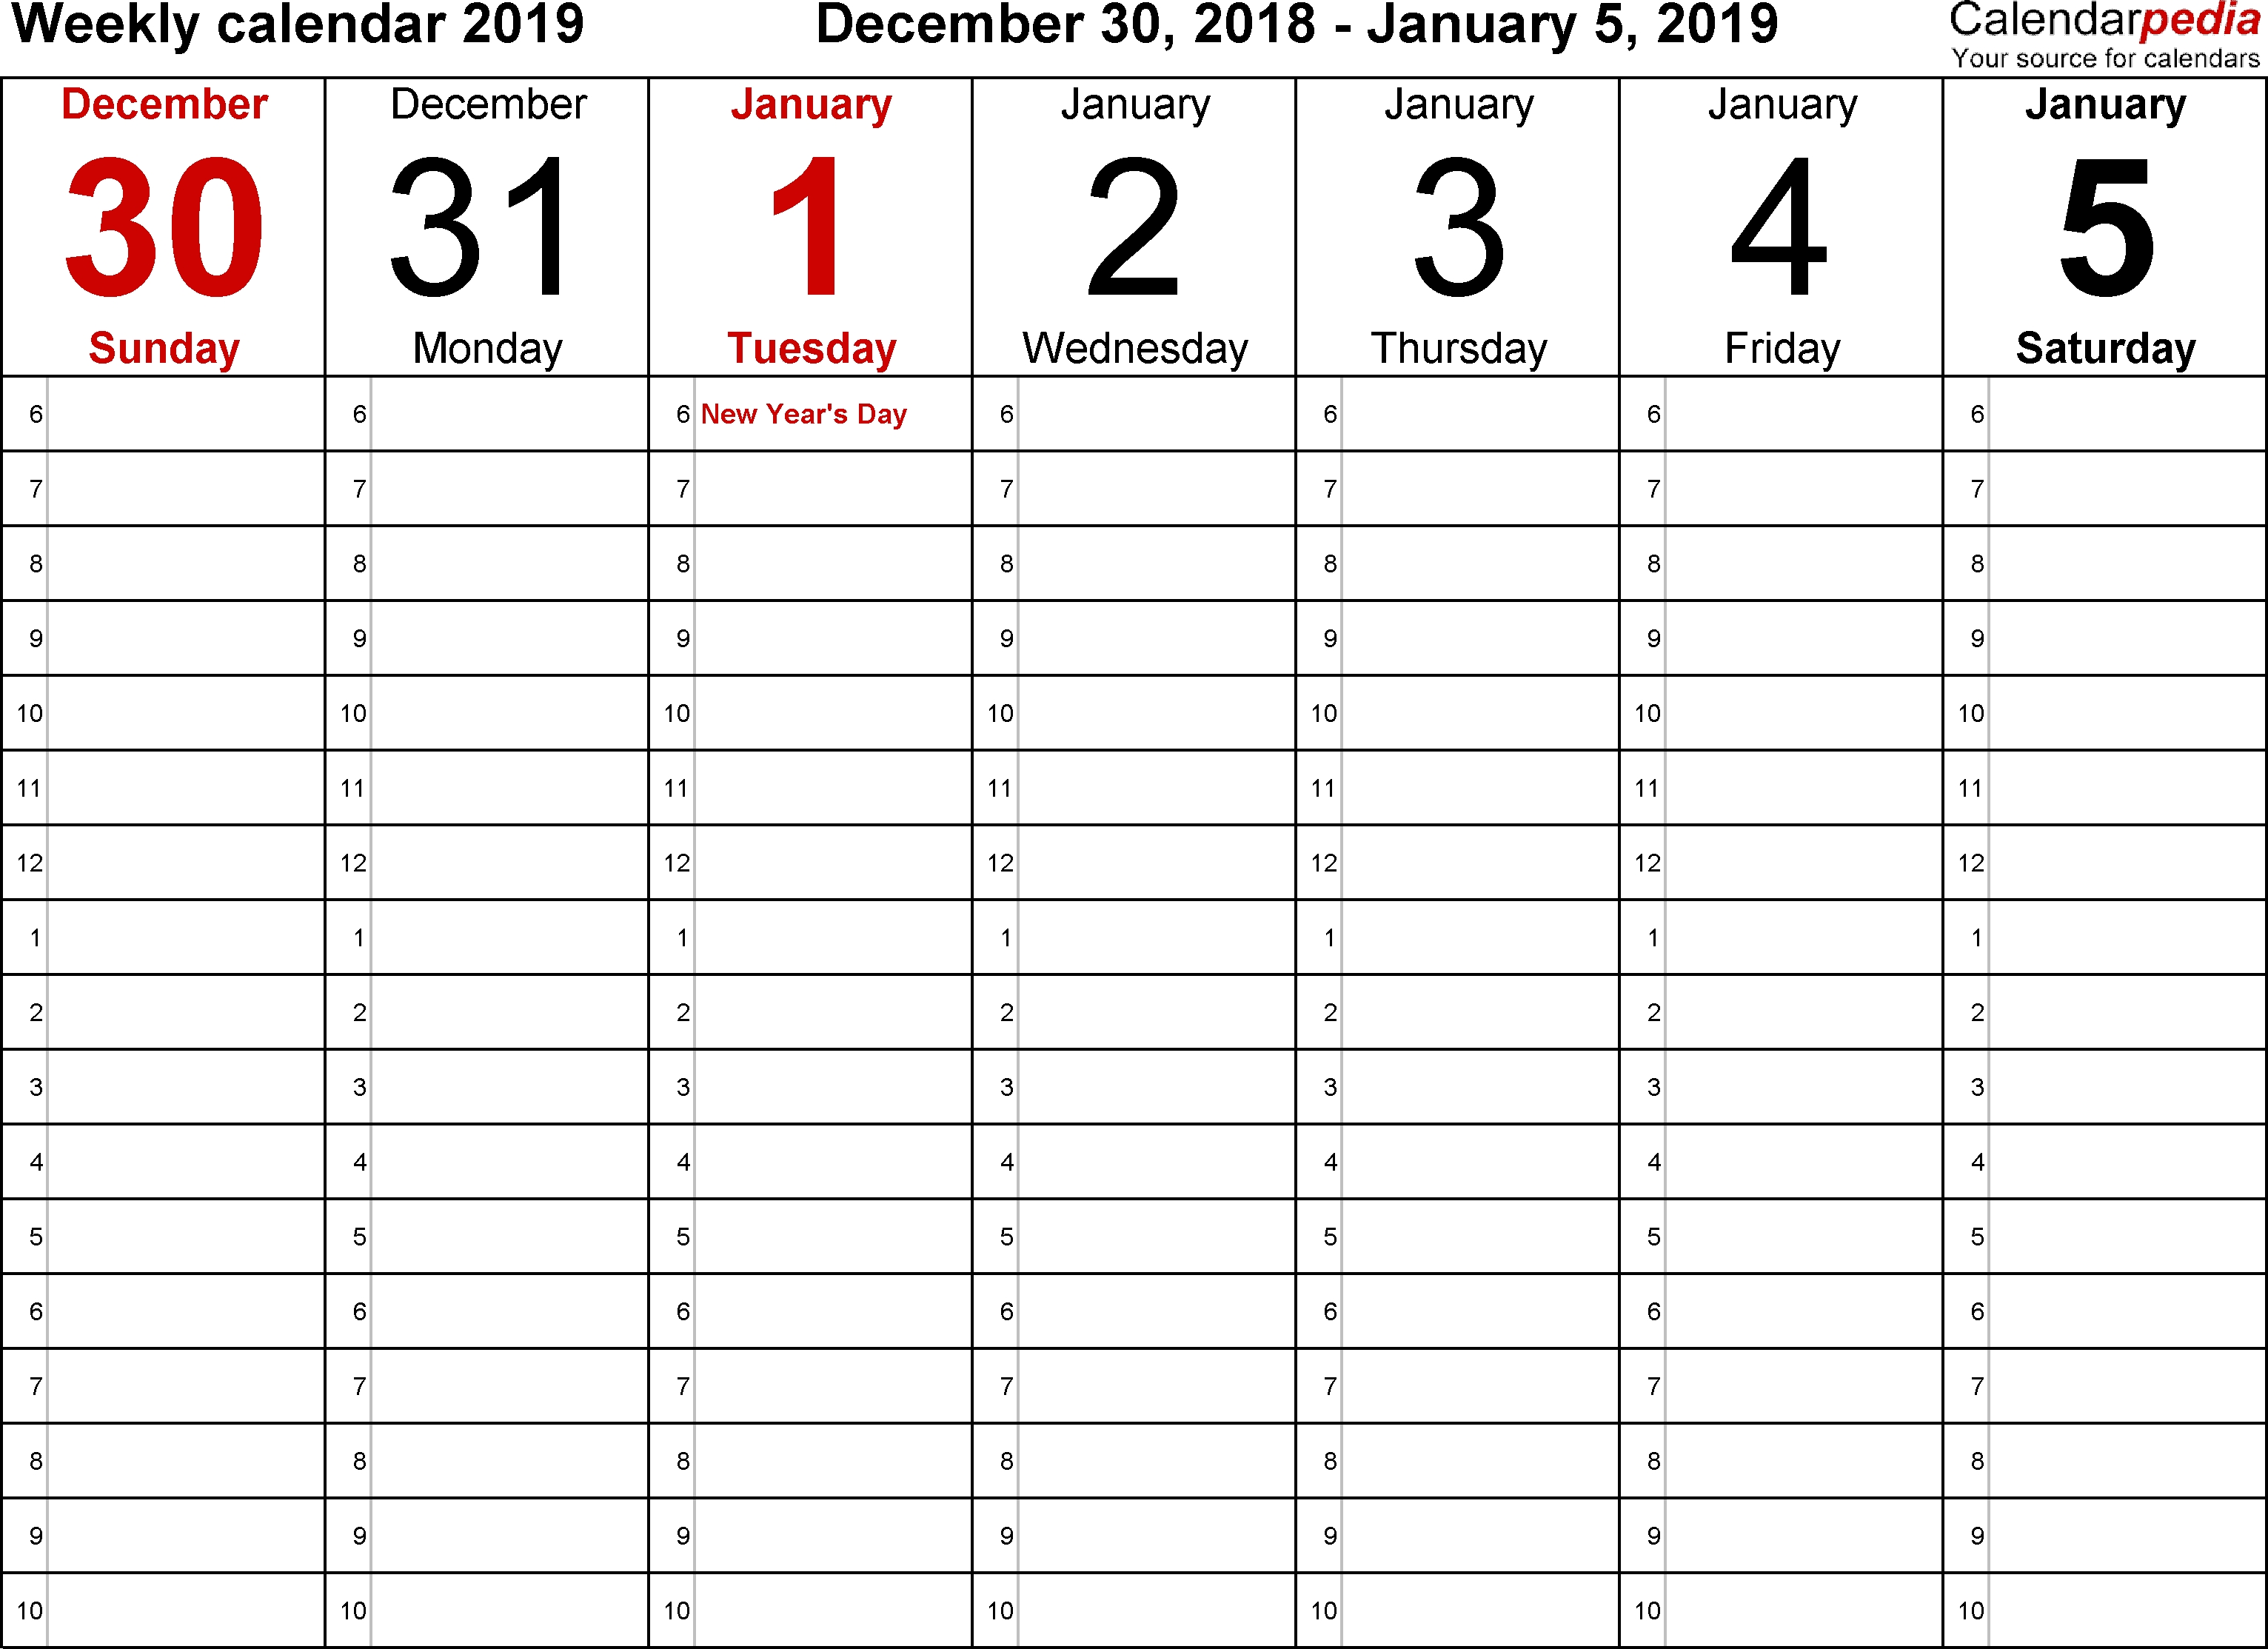 Weekly Calendar 2019 For Word - 12 Free Printable Templates pertaining to July Printable Calendar With Hours